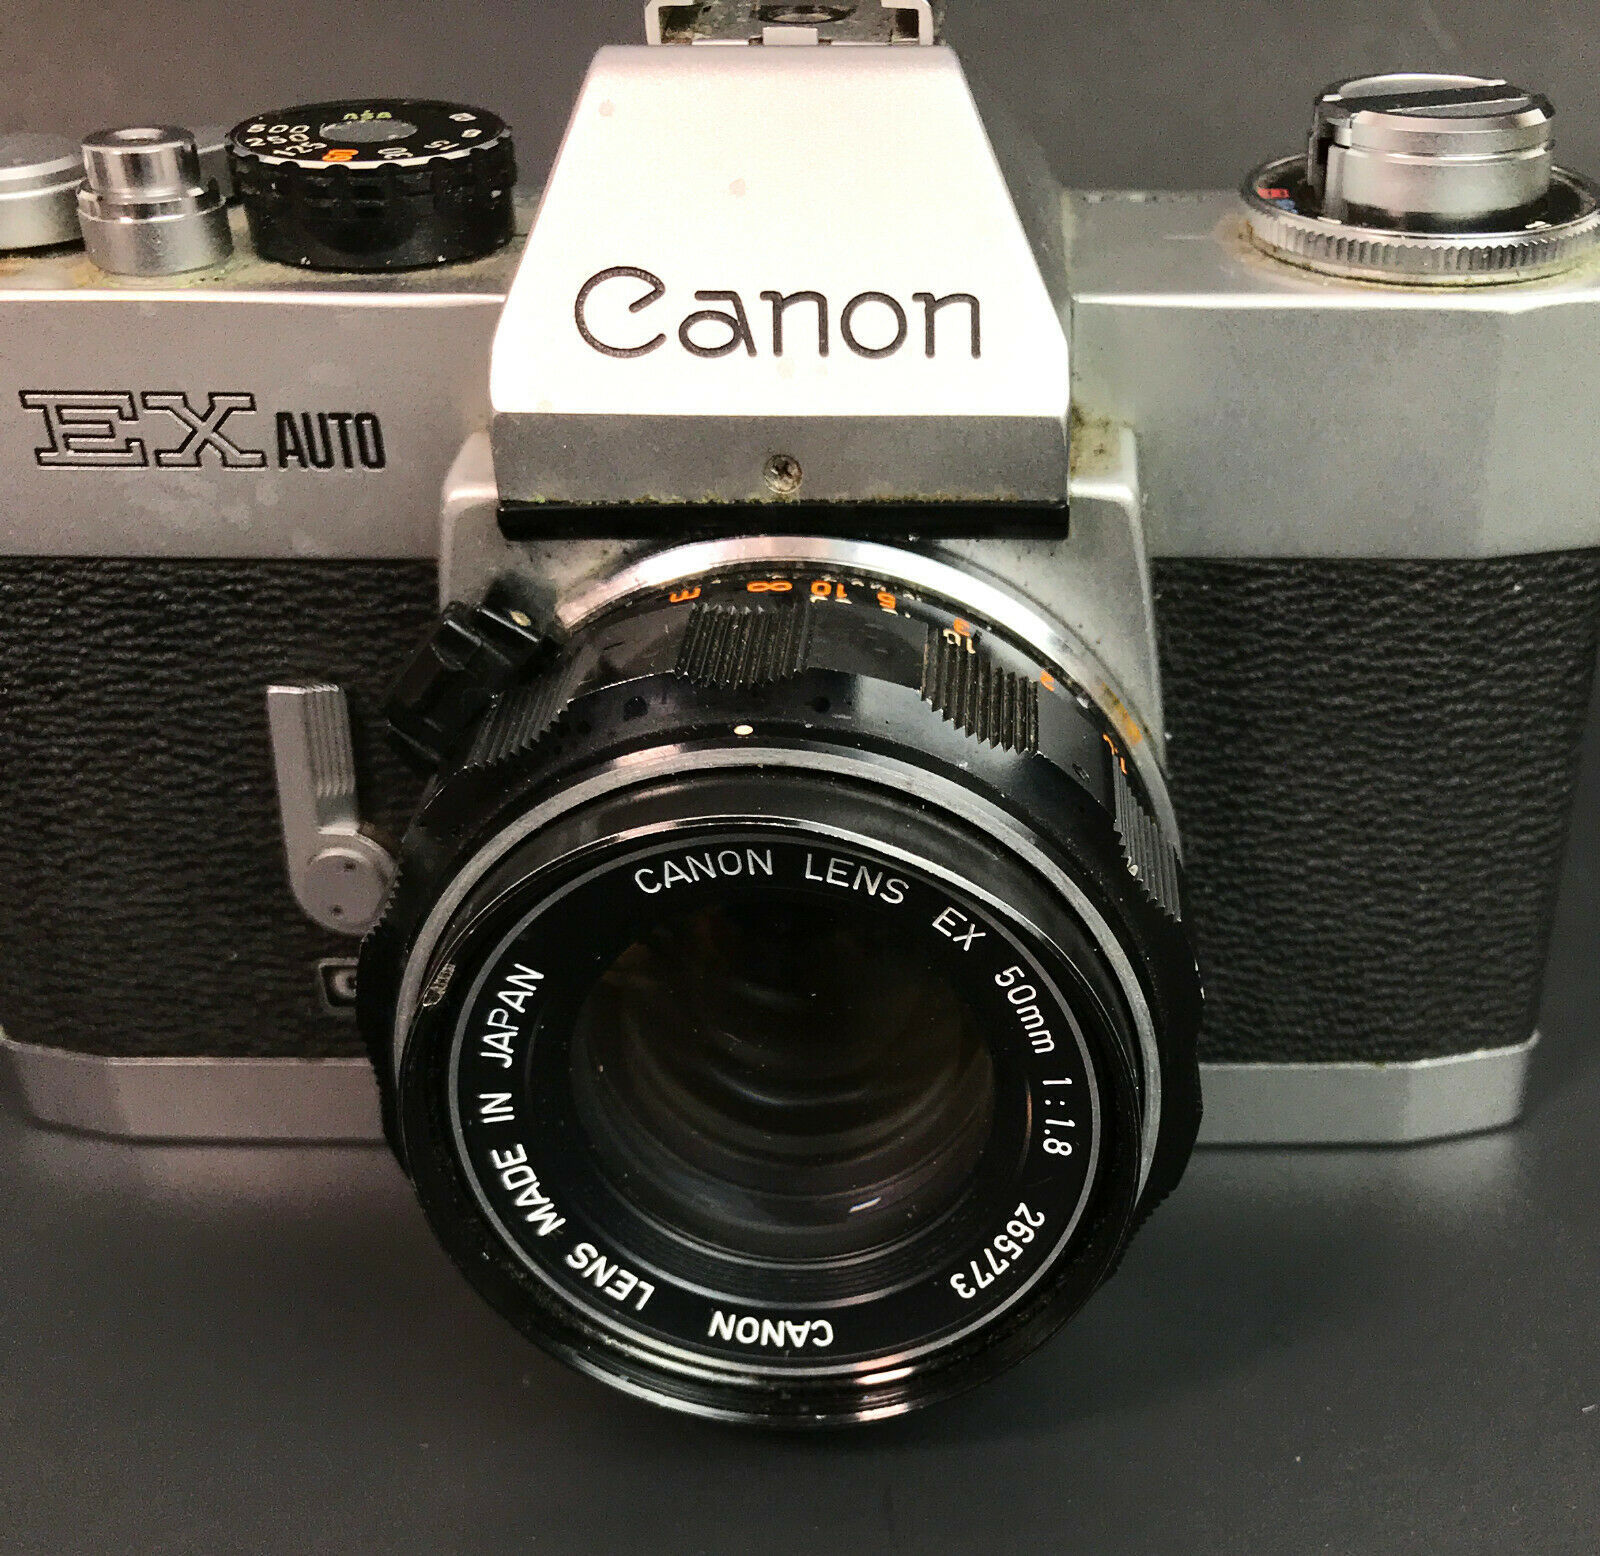 Canon Ex Auto Ql 35mm Slr Film Camera With And 50 Similar Items